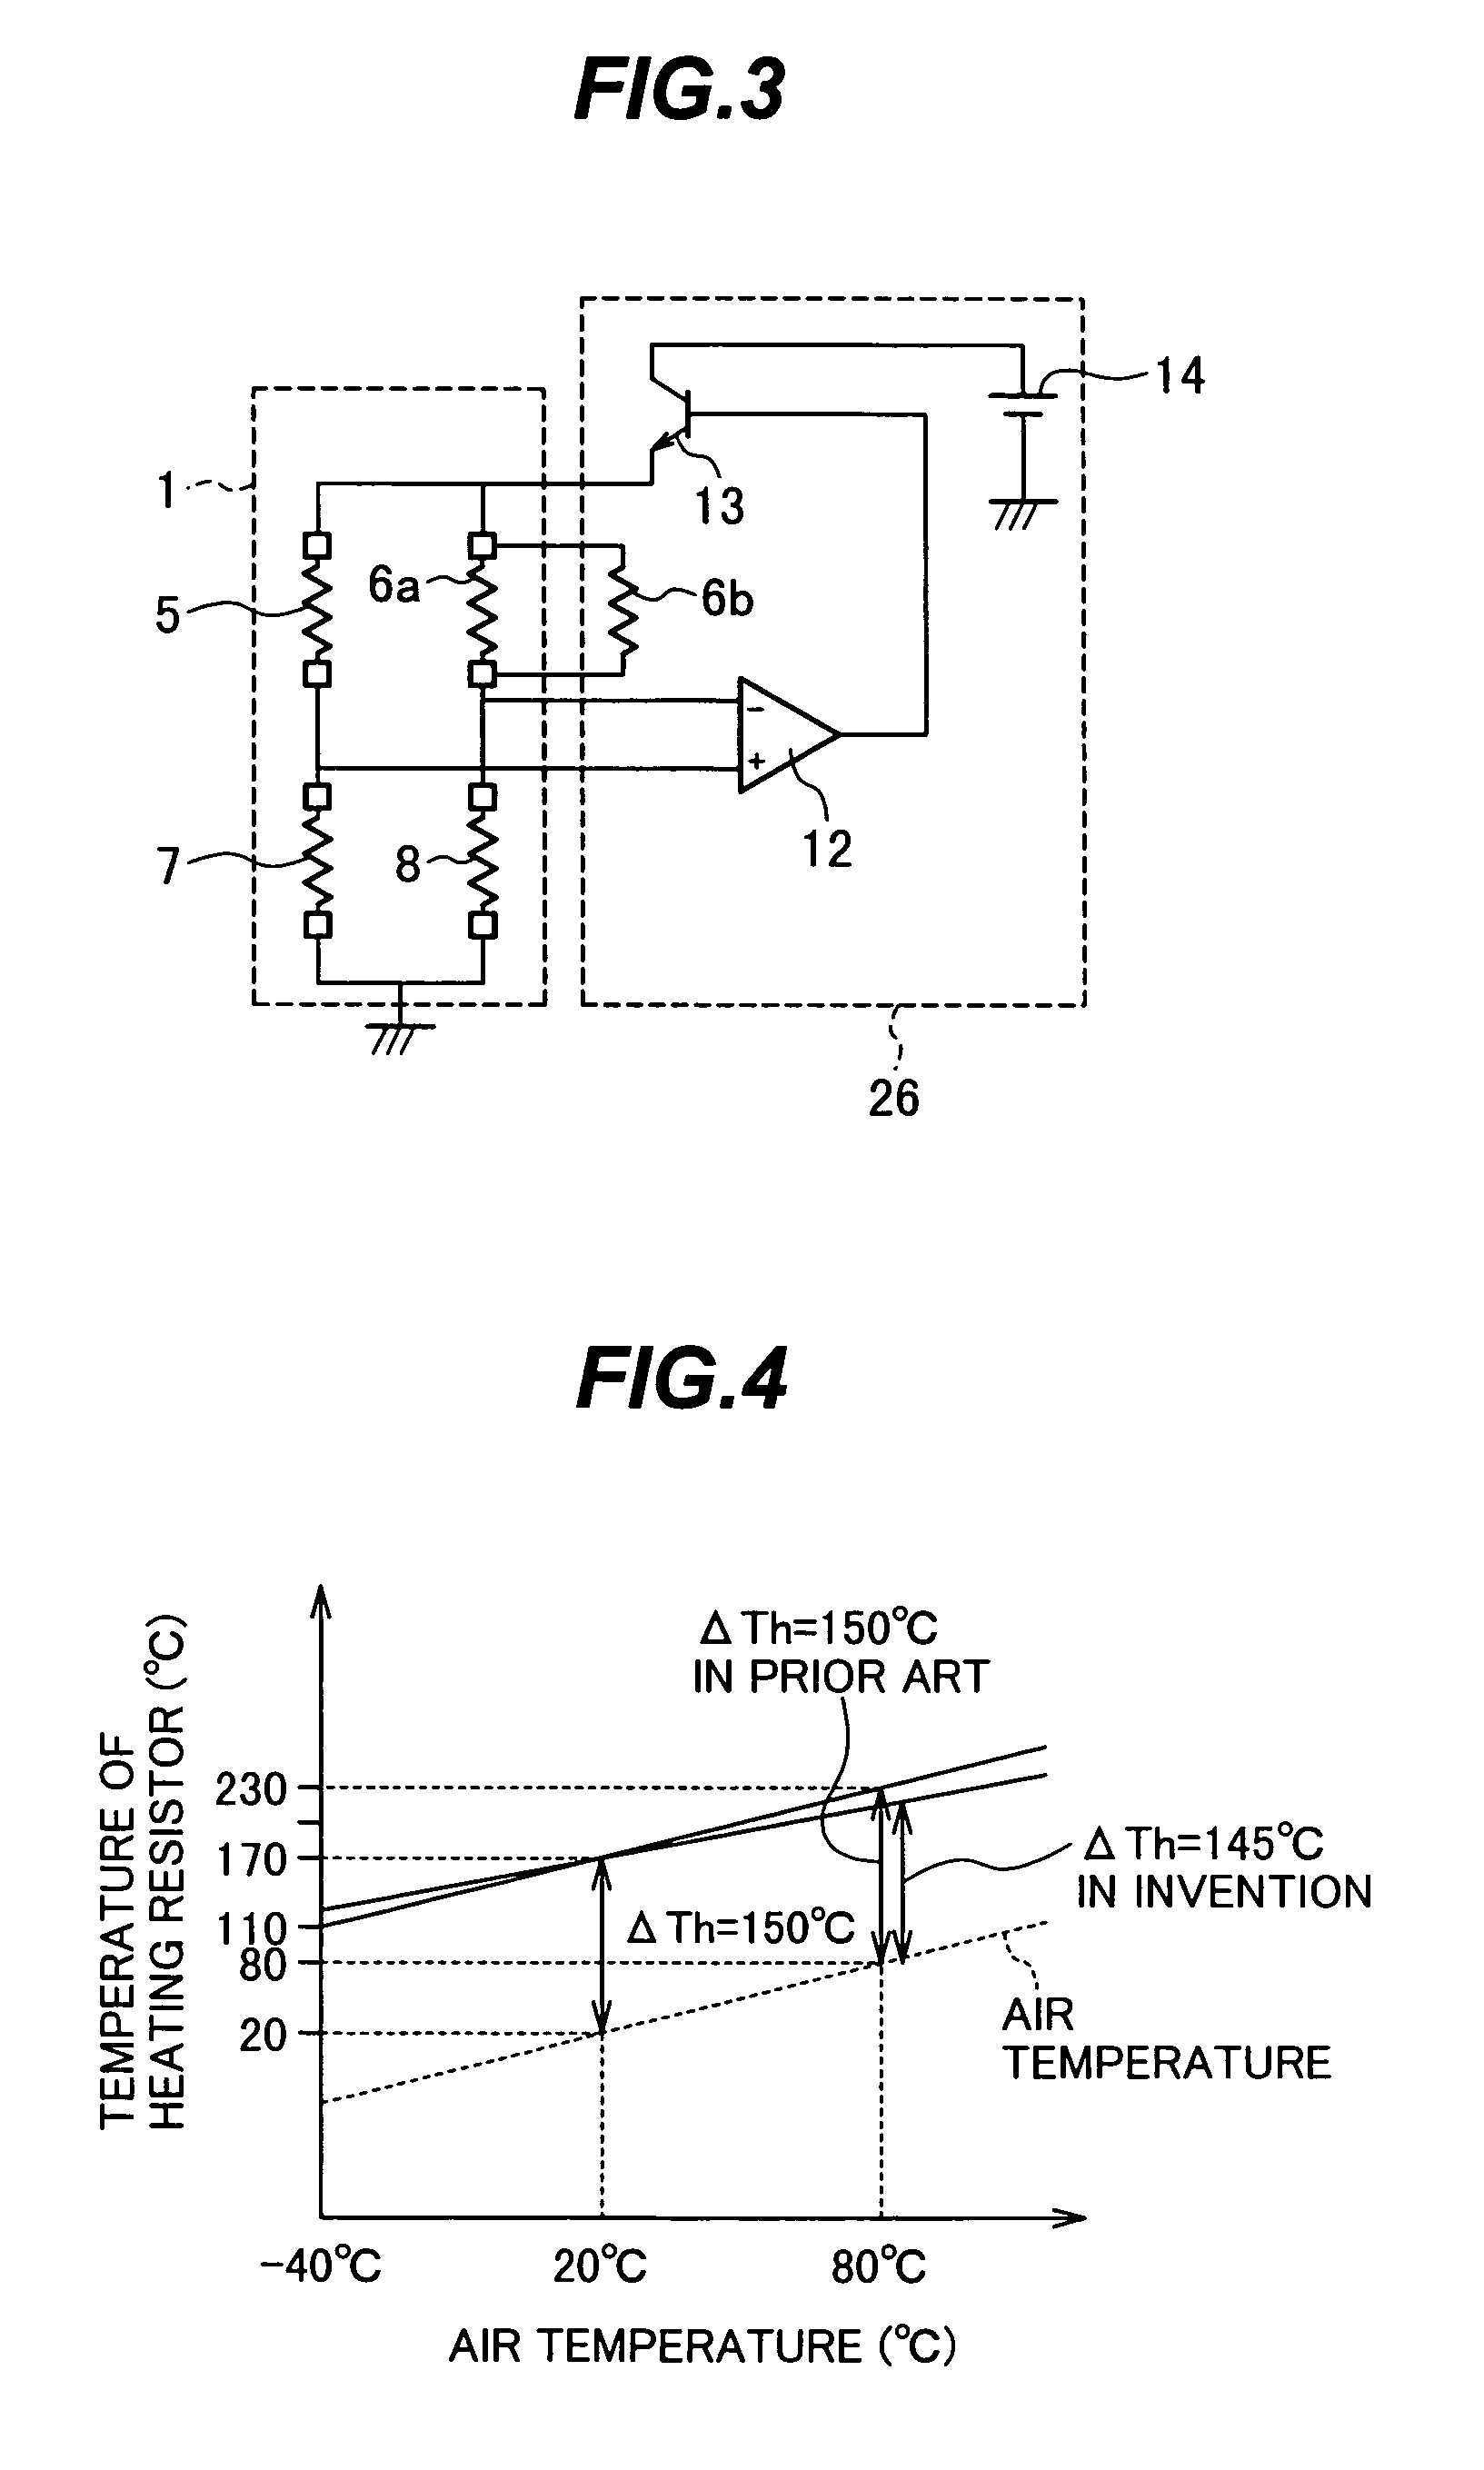 Thermal flowmeter for measuring a flow rate of fluid